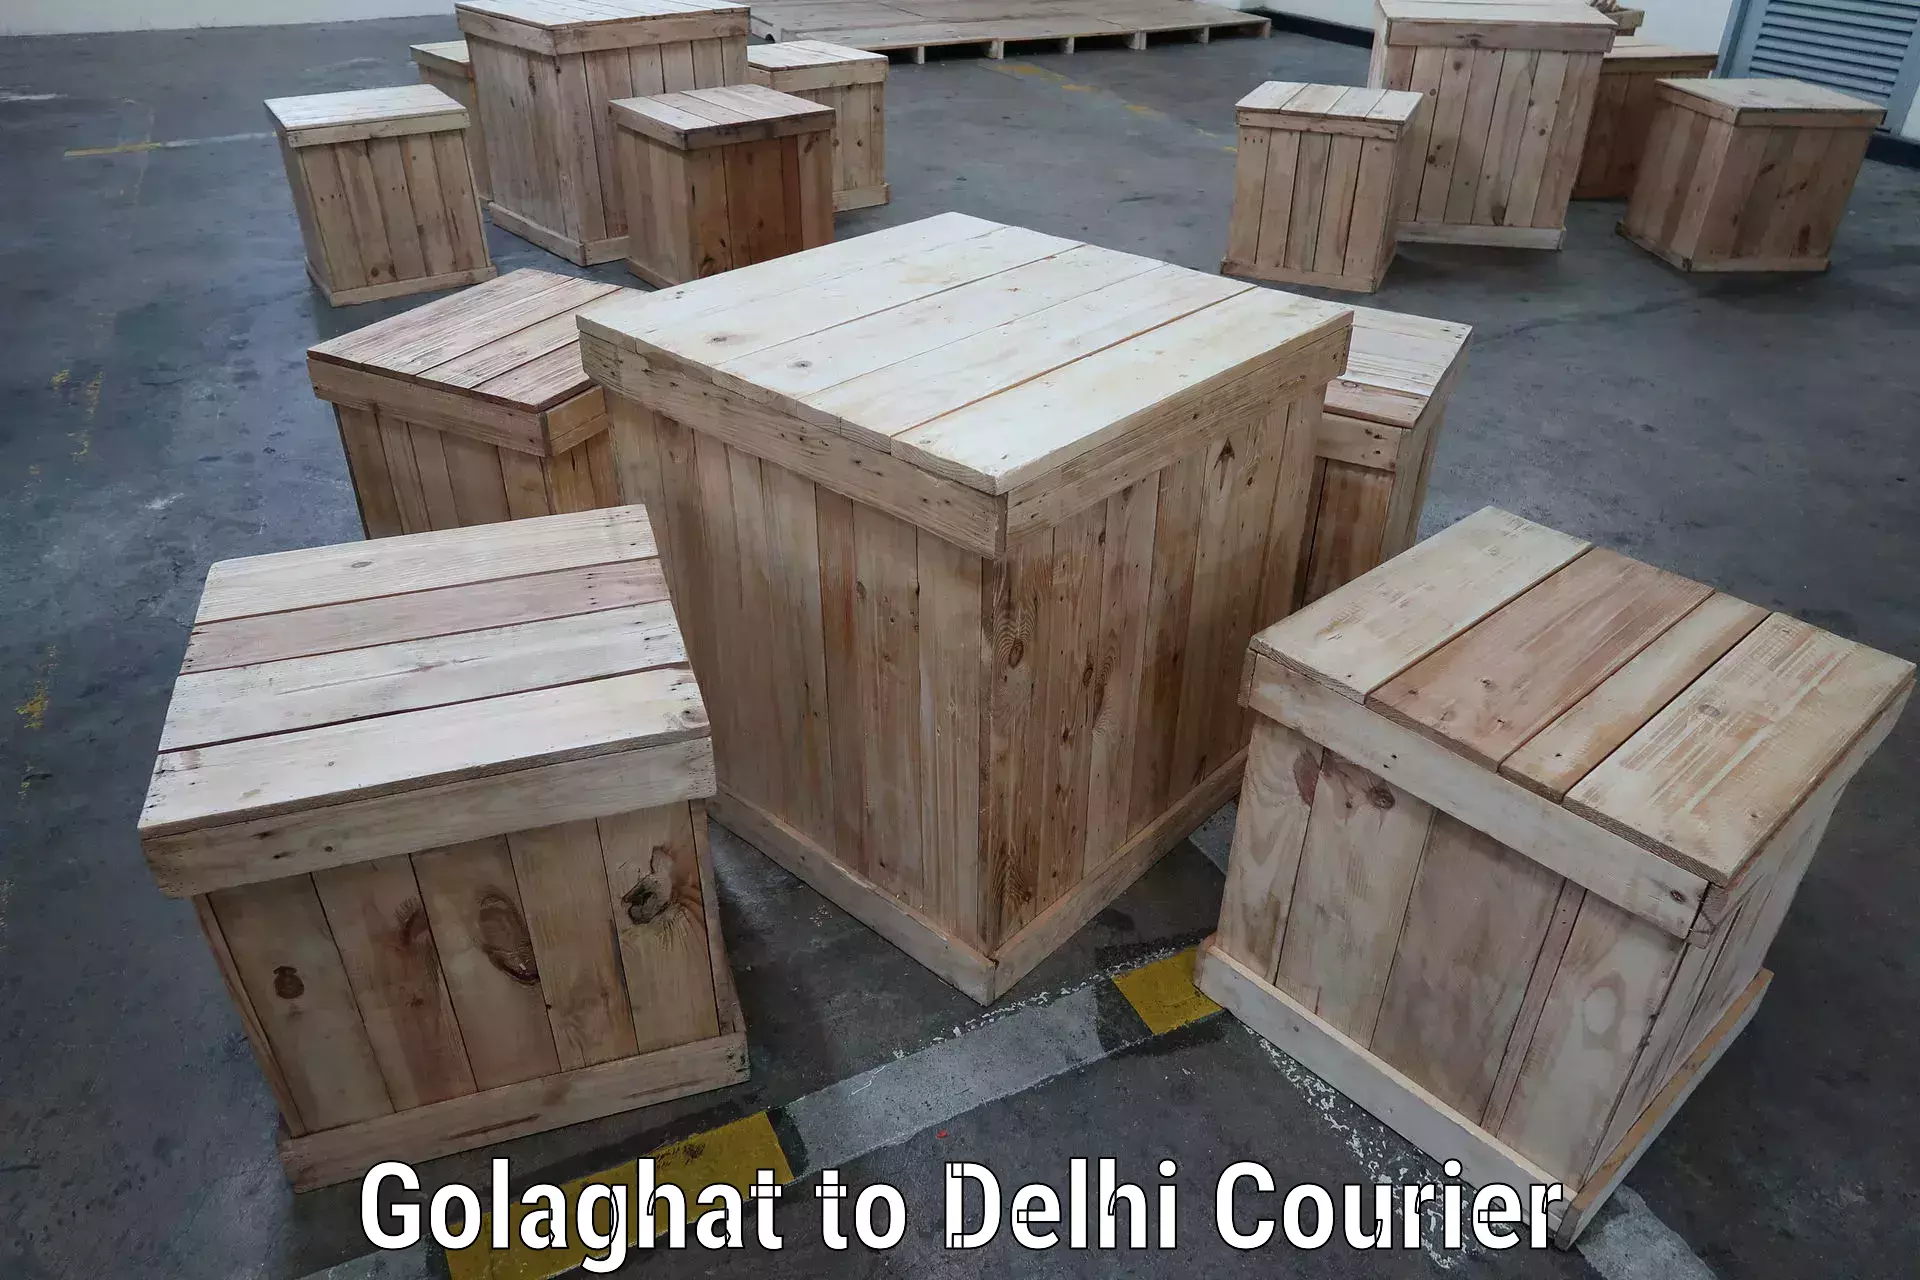 Expedited shipping solutions Golaghat to Jawaharlal Nehru University New Delhi